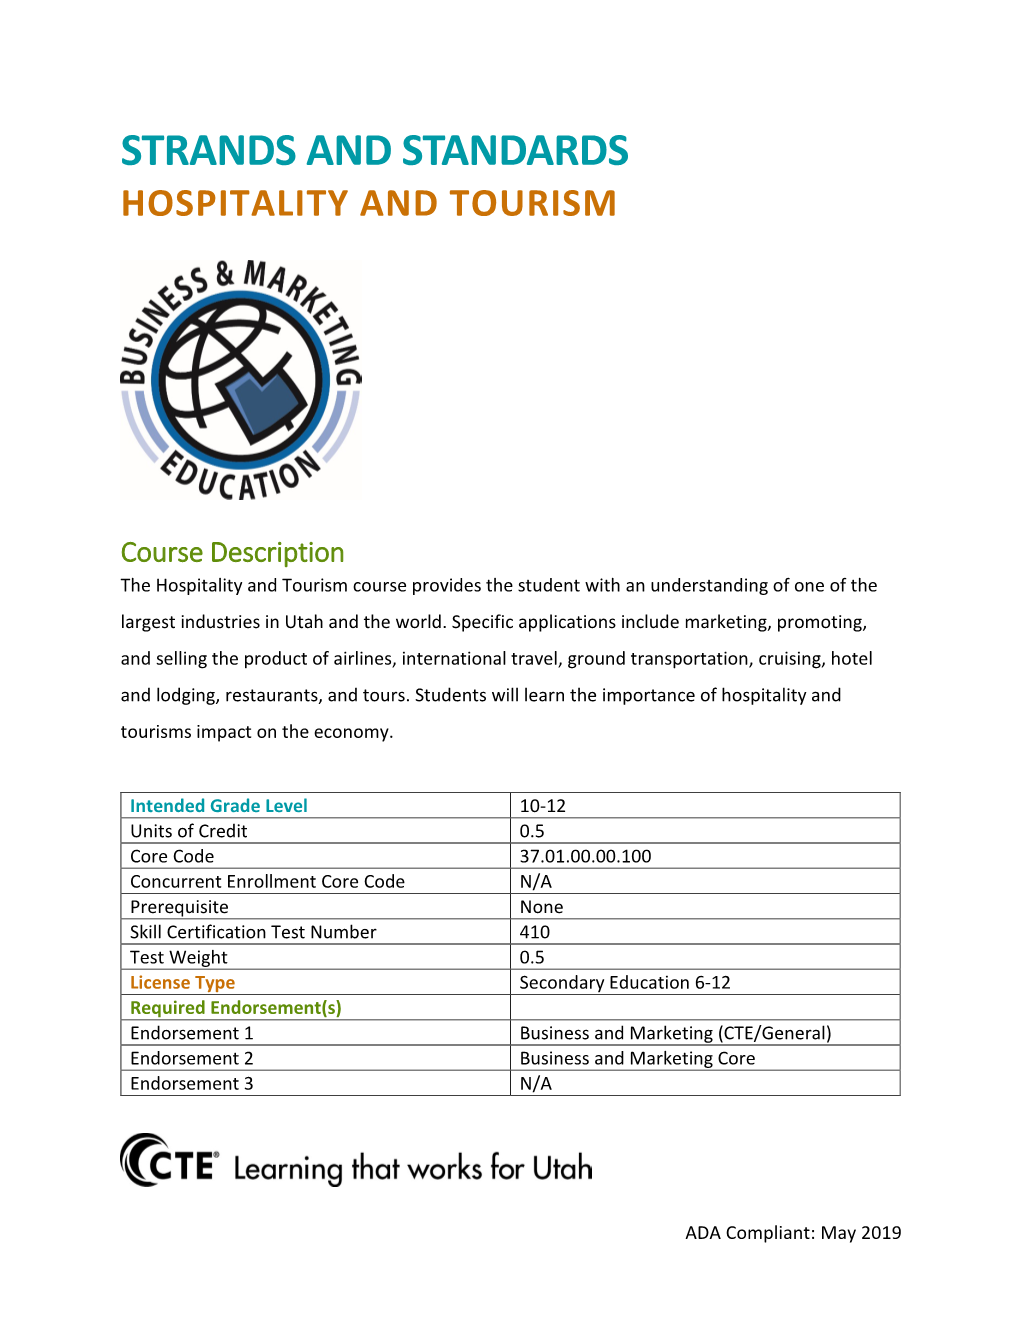 Hospitality and Tourism Strands and Standards